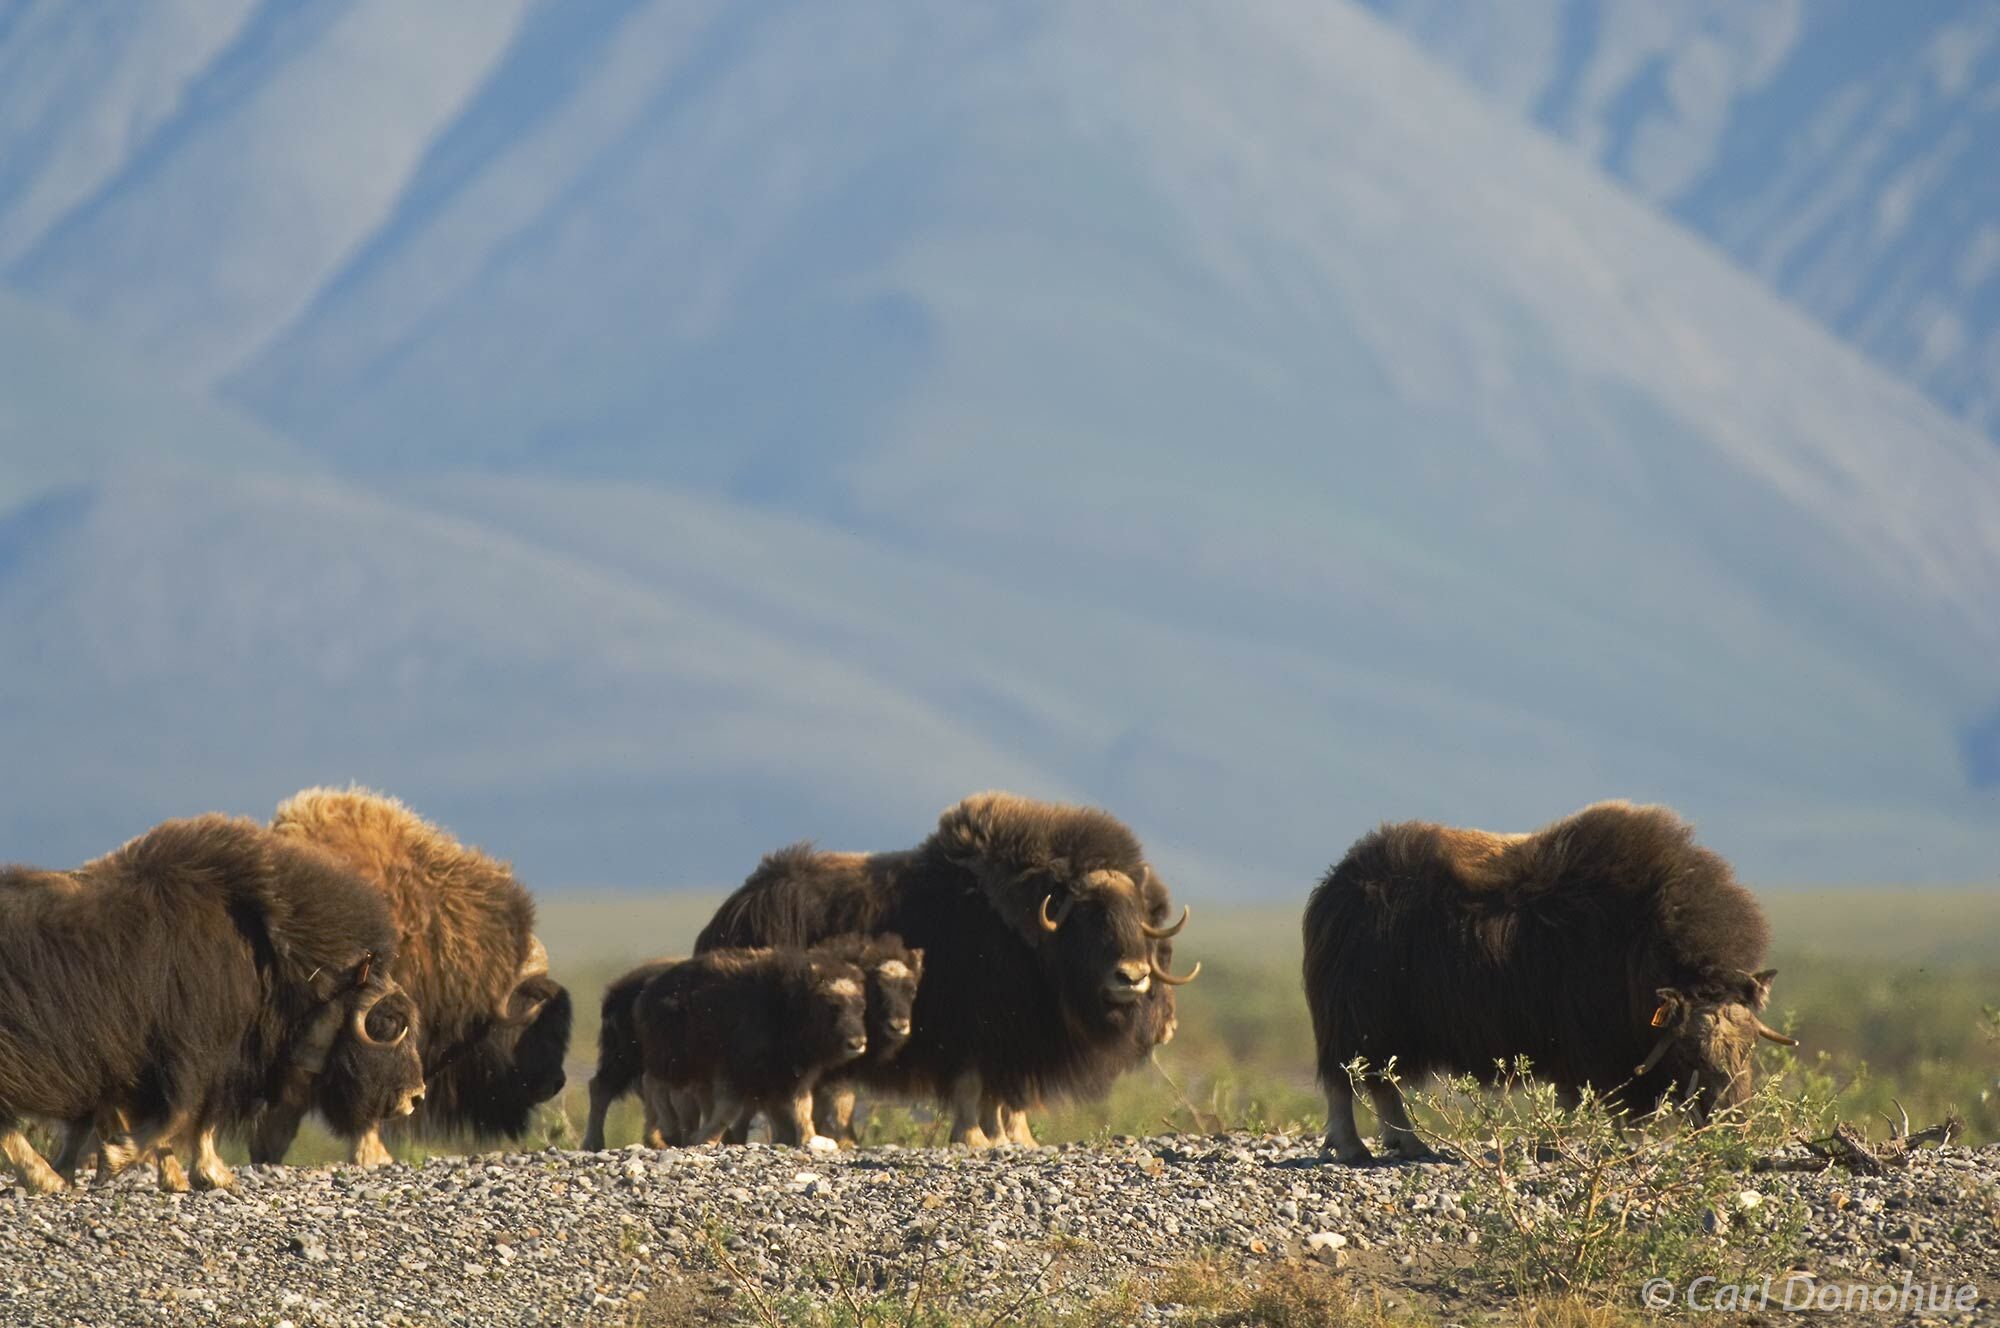 A small band of muskox, or musk ox, on the arctic coastal plain.  Muskox live in small bands in the arctic, and amazingly, seem...